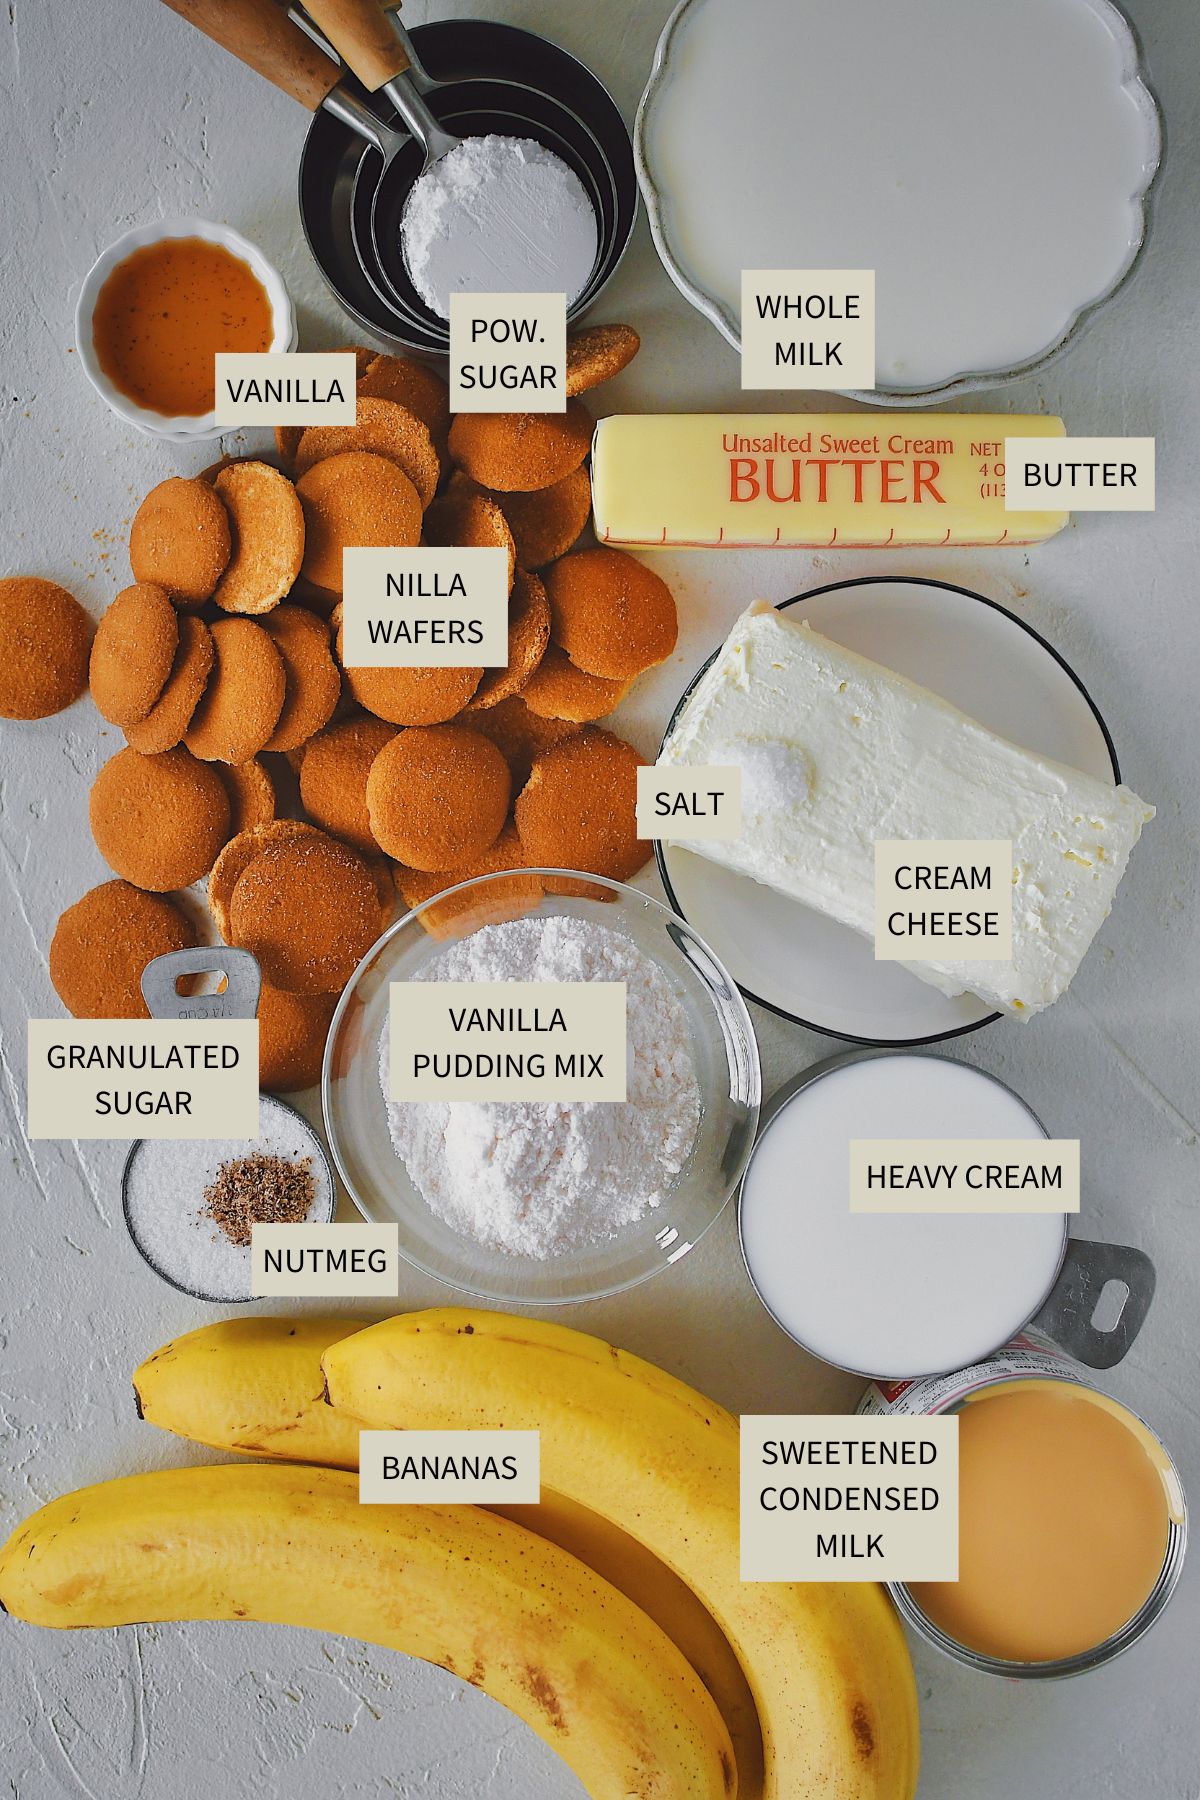 Ingredients needed to make Banana Pudding Pie.